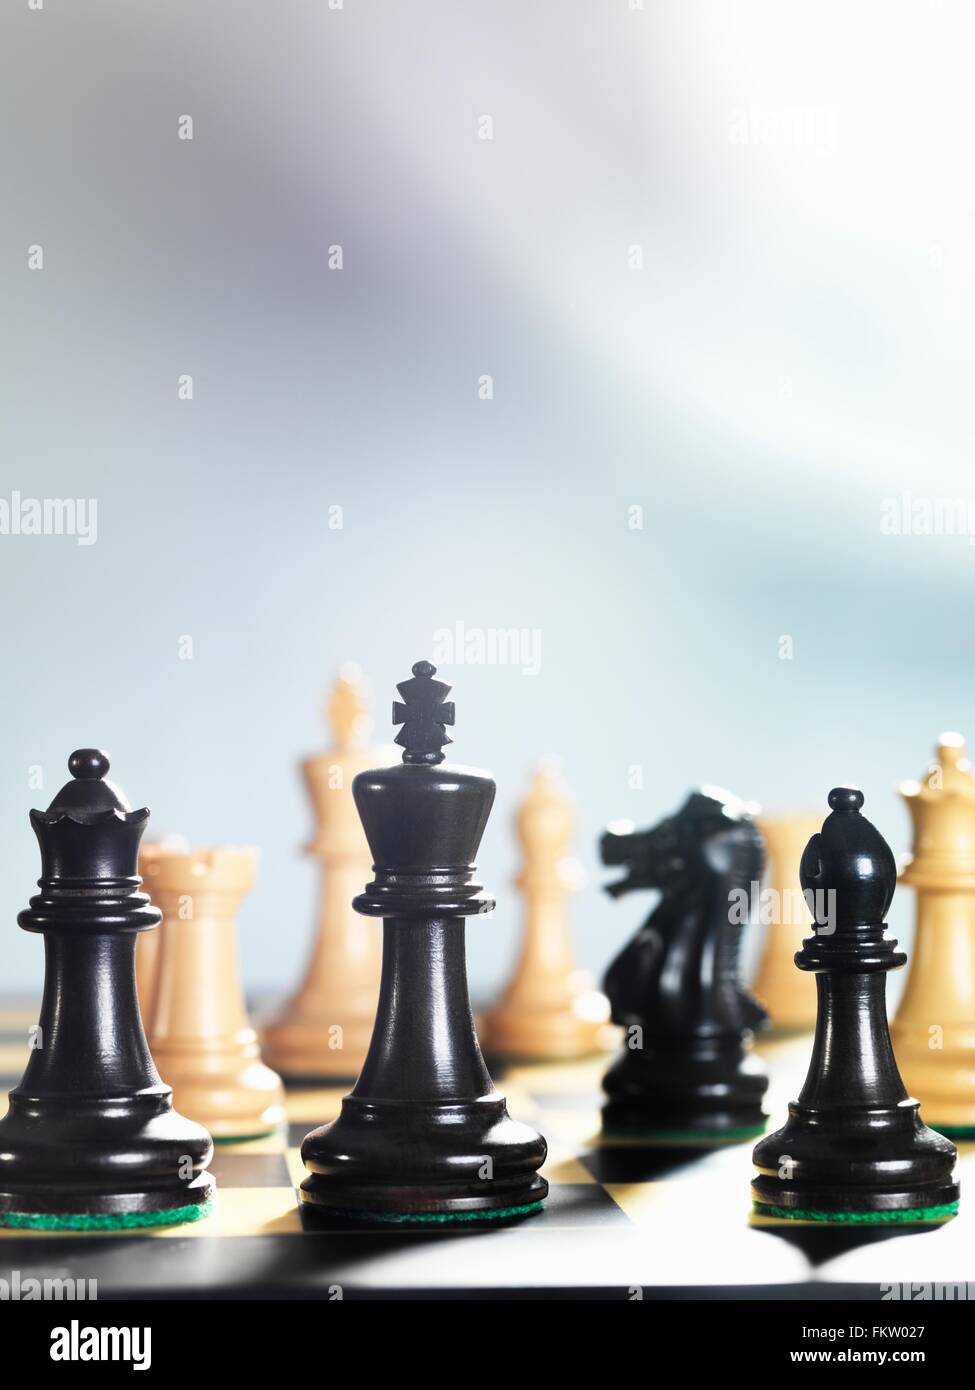 Foreground focus close up of chess game and chess pieces Stock Photo